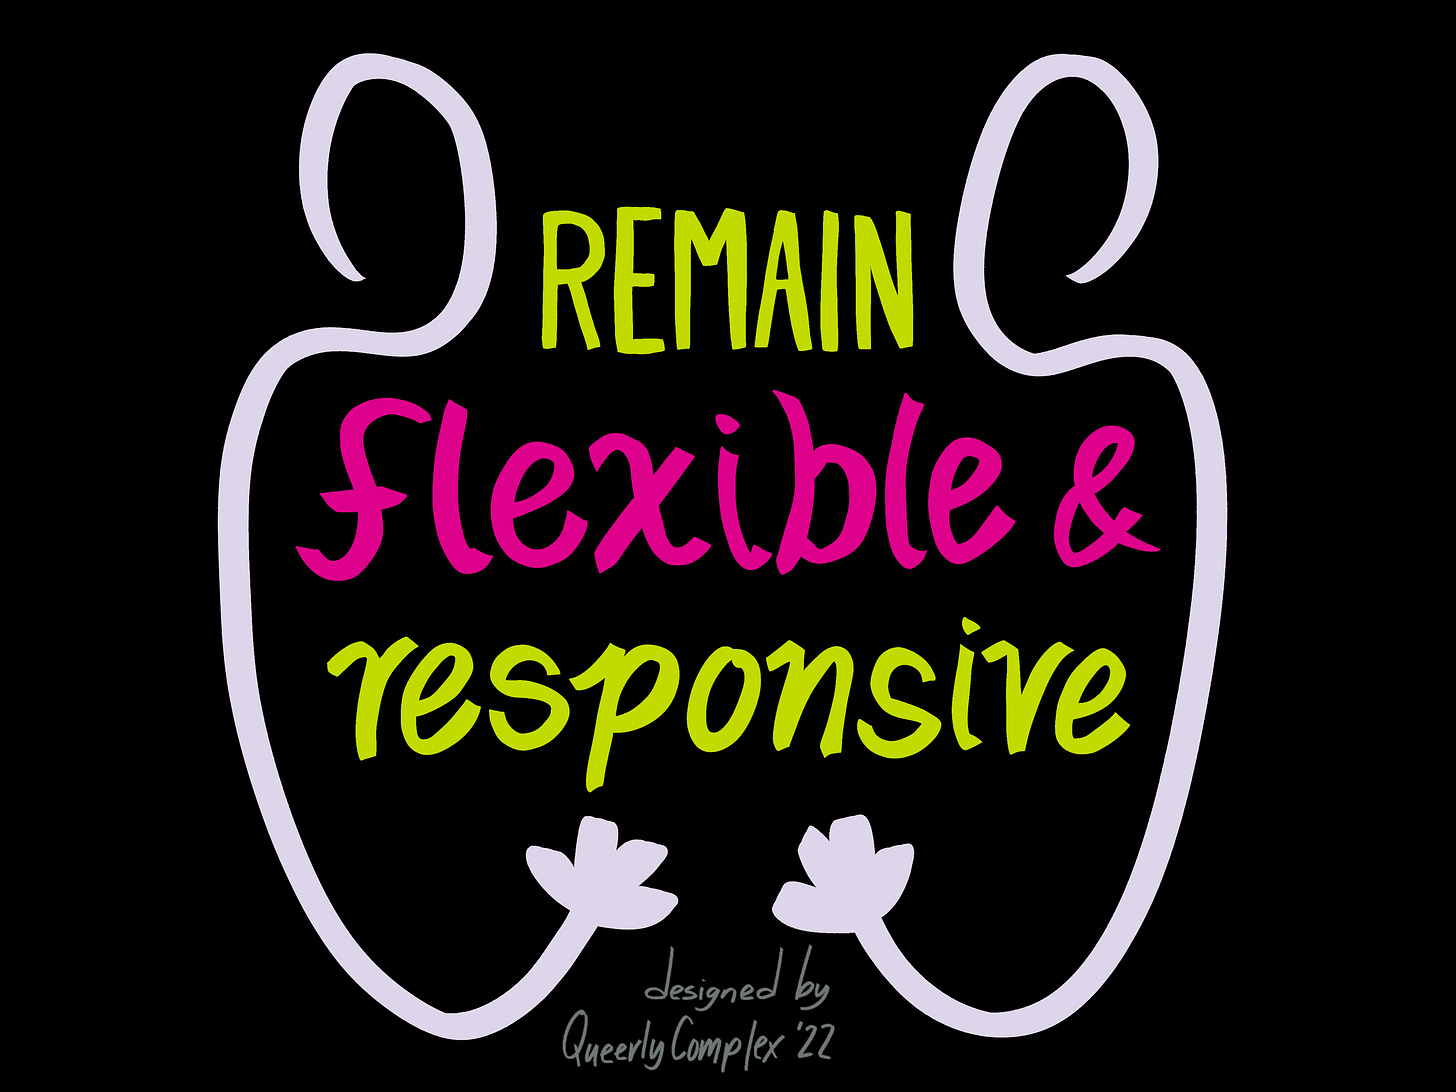 "Remain flexible and responsive" in hand lettering with two white symbols that look like outlines of people looking at each other and reaching their hands out to each other. The symbol also looks like it could be something sprouting and growing. Designed by Queerly Complex. 